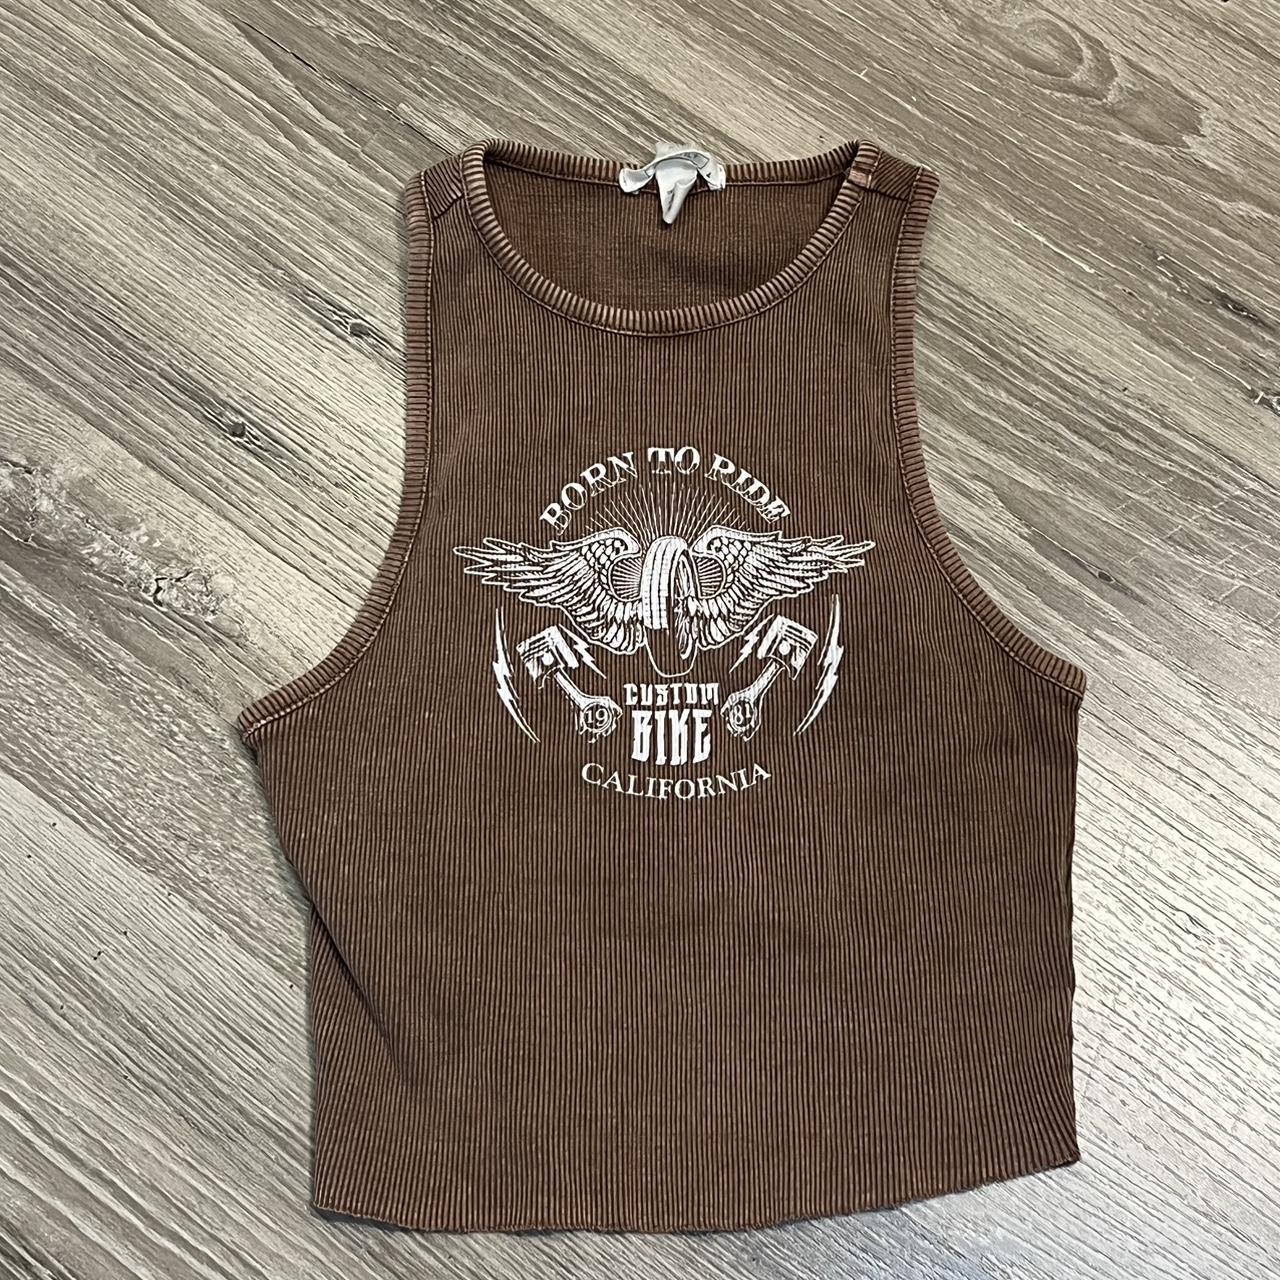 Tillys Women's Brown and White Vest